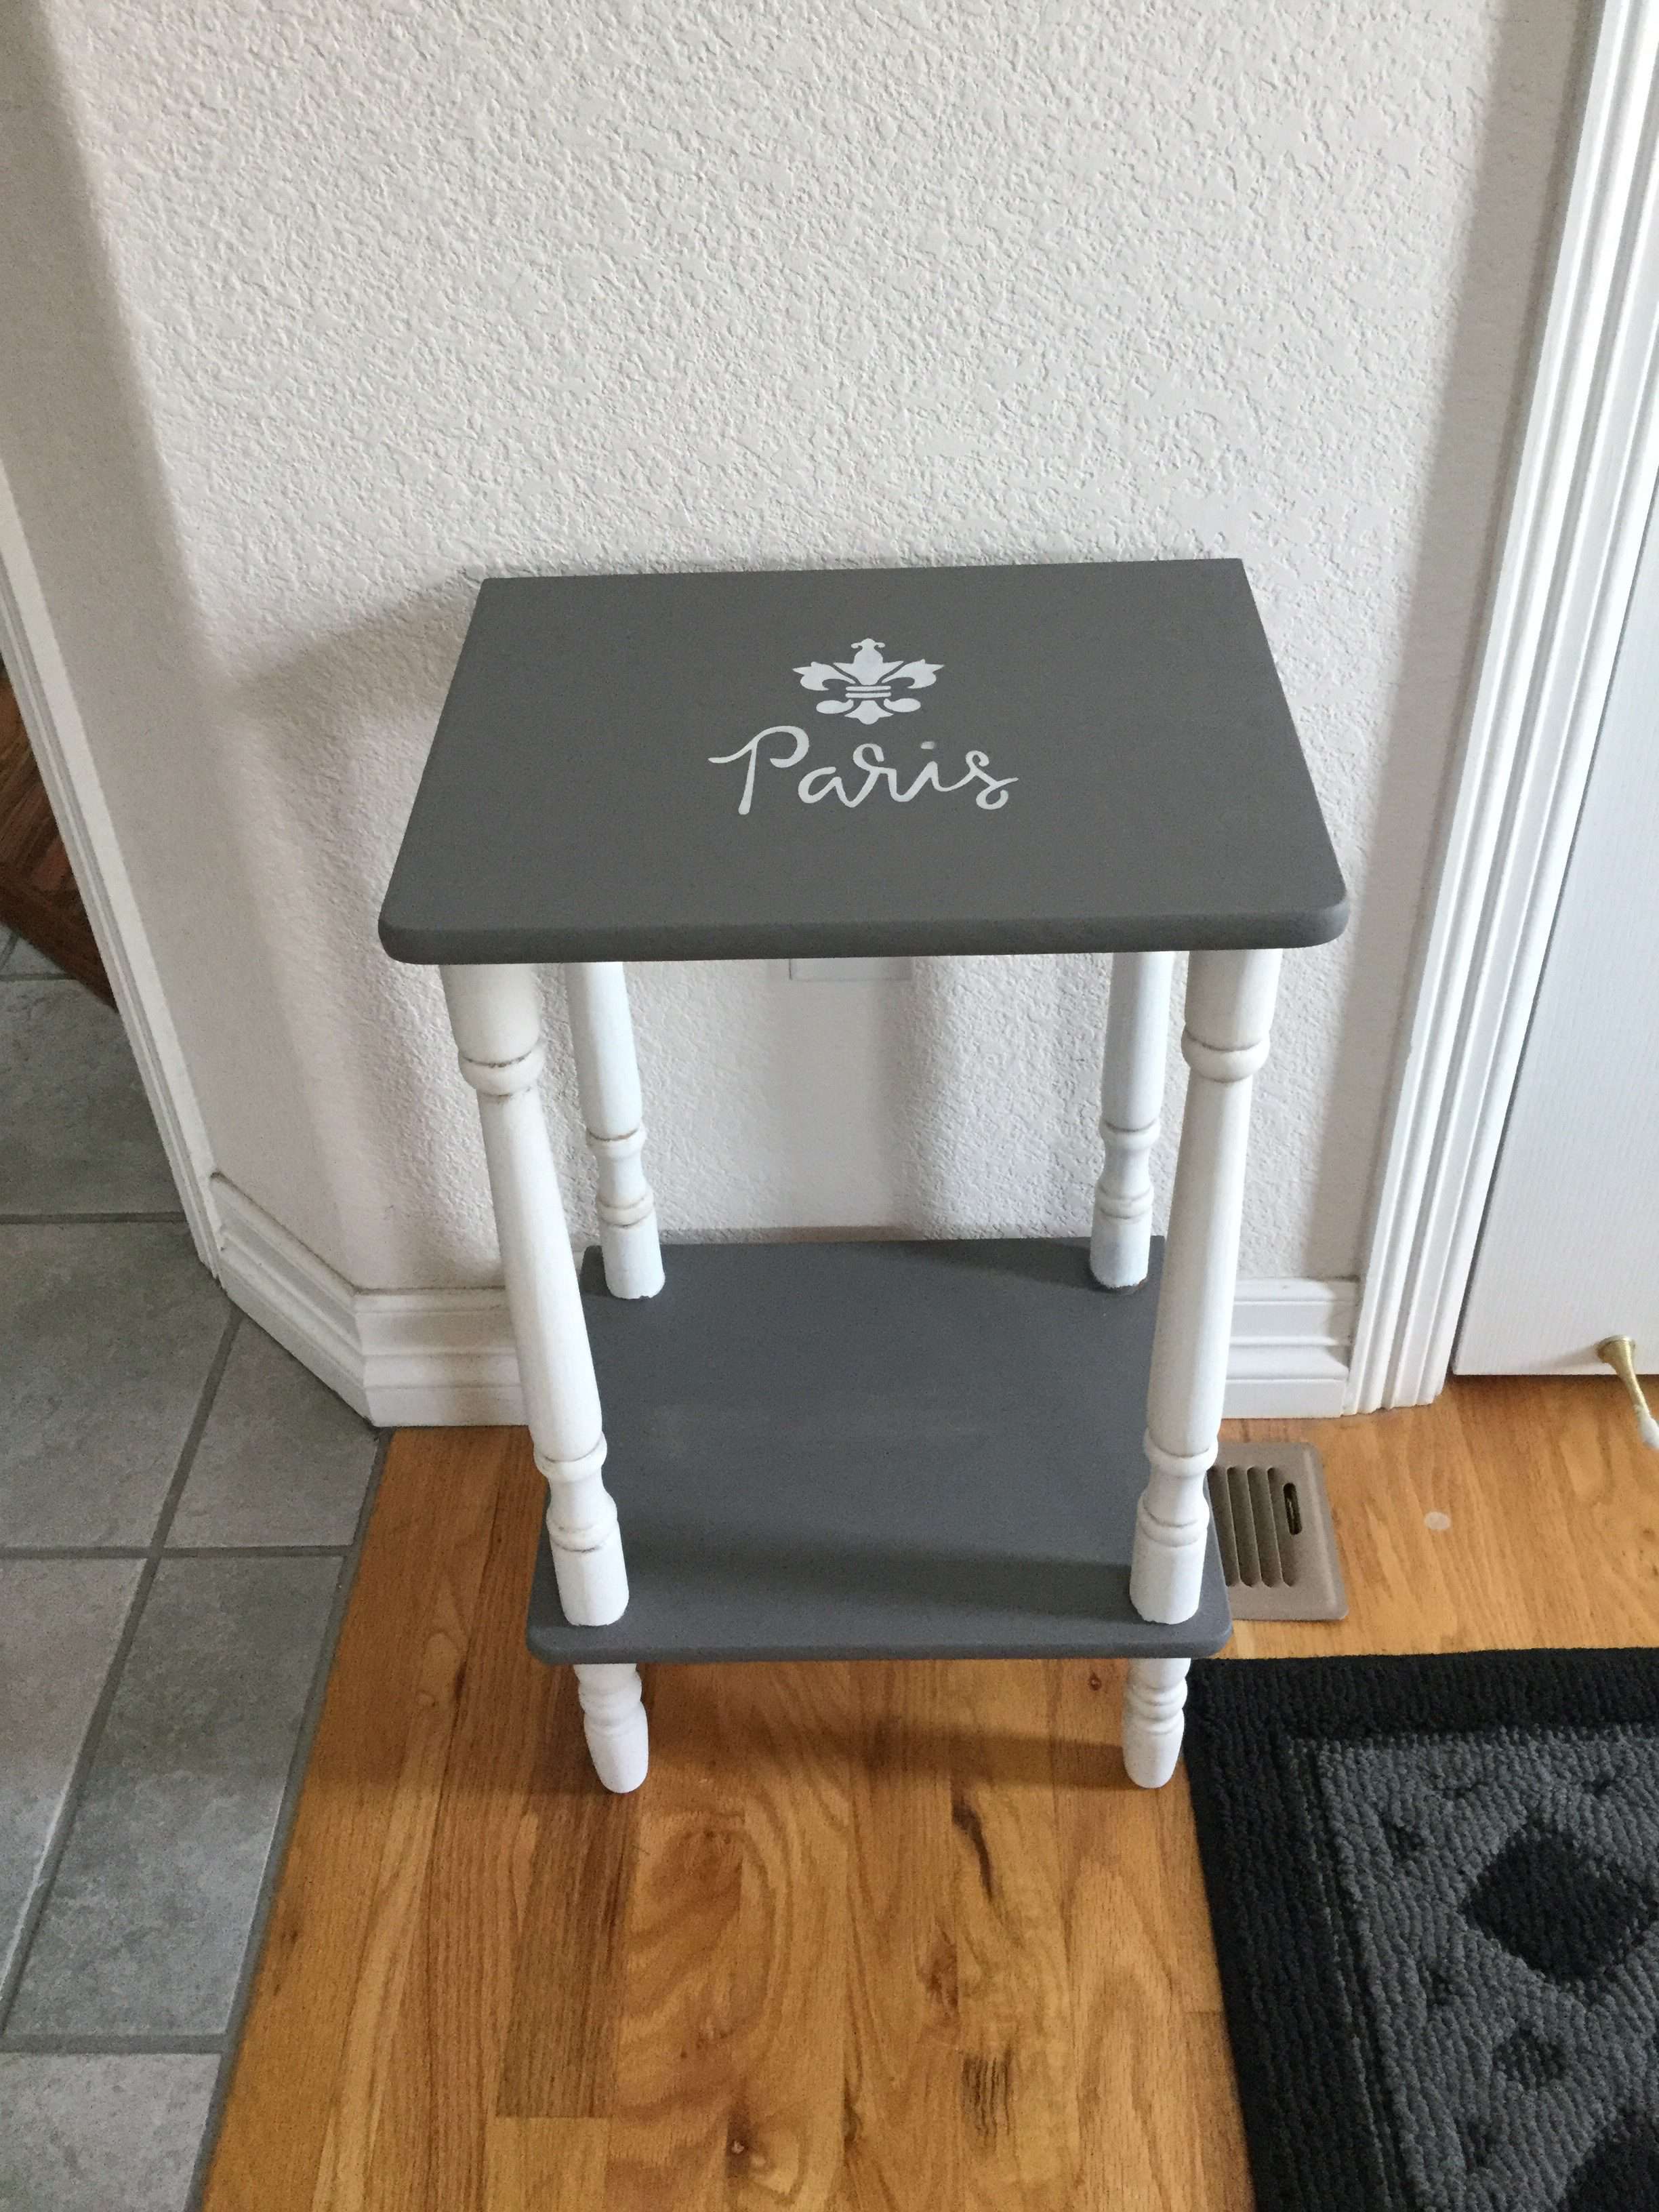 Do you ever wonder how to revamp, update, or makeover a side table? I have been dabbling in making over a few furniture pieces and when I saw this side table for $1 at a garage sale, I thought what have I got to lose! In this post I'm doing a side table makeover with painting, stenciling, and glazing.